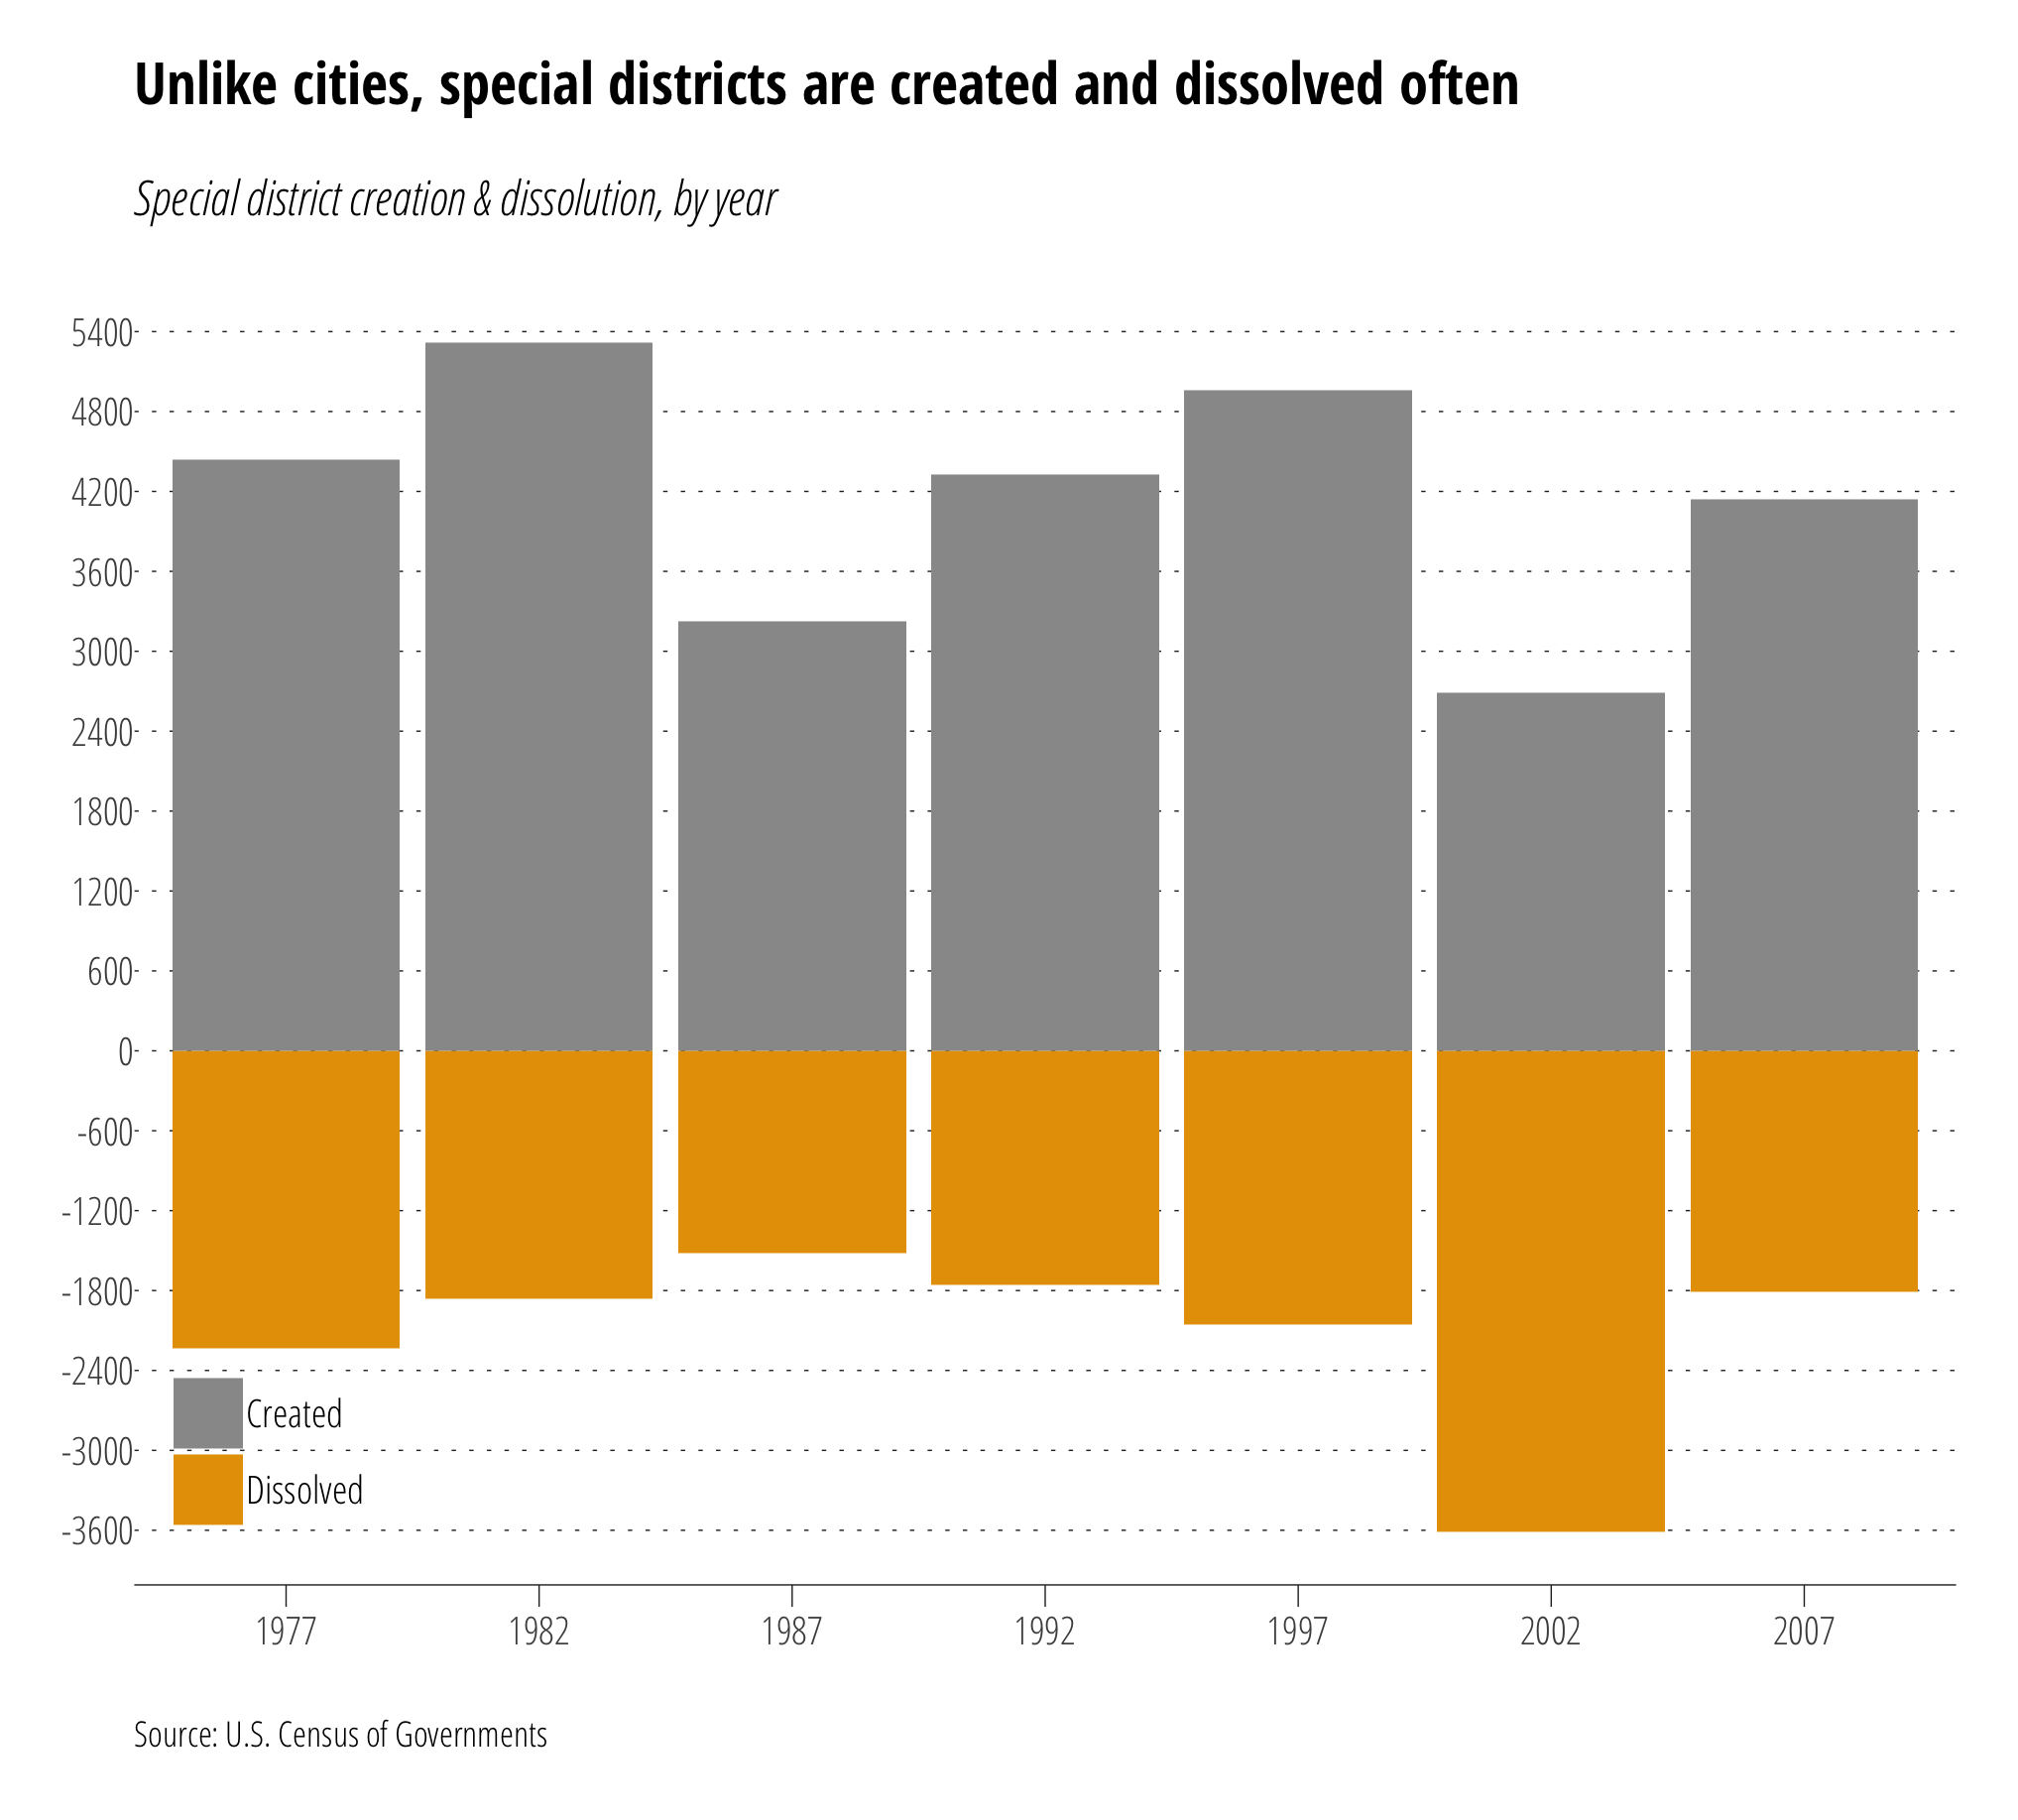 Special District Creation and Dissolution